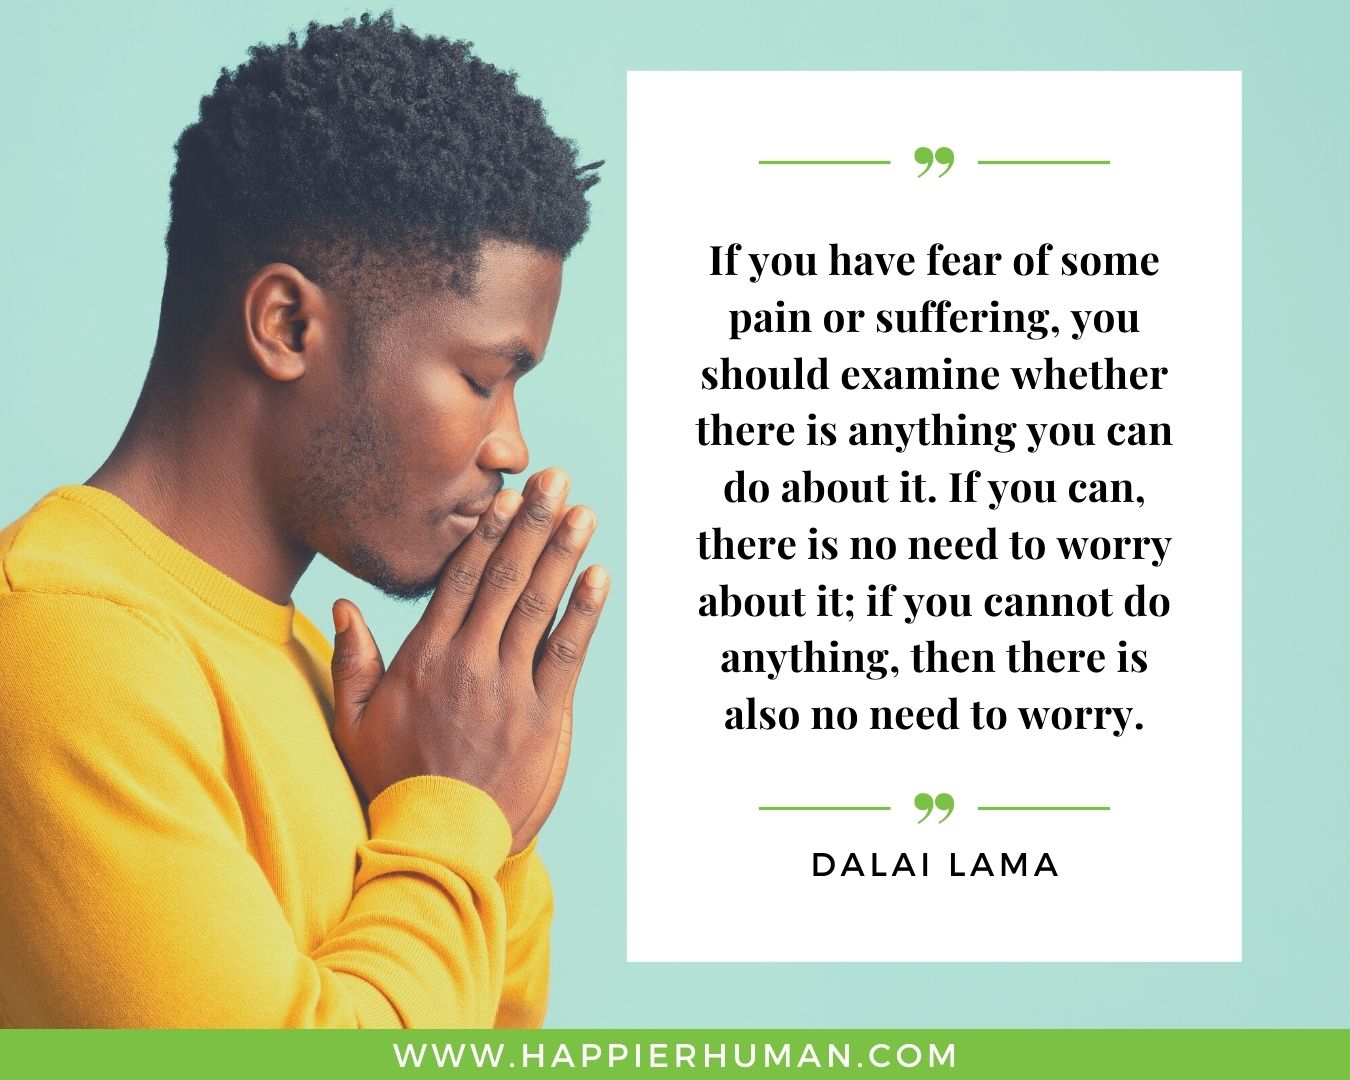 Overthinking Quotes - "If you have fear of some pain or suffering, you should examine whether there is anything you can do about it. If you can, there is no need to worry about it; if you cannot do anything, then there is also no need to worry." - Dalai Lama